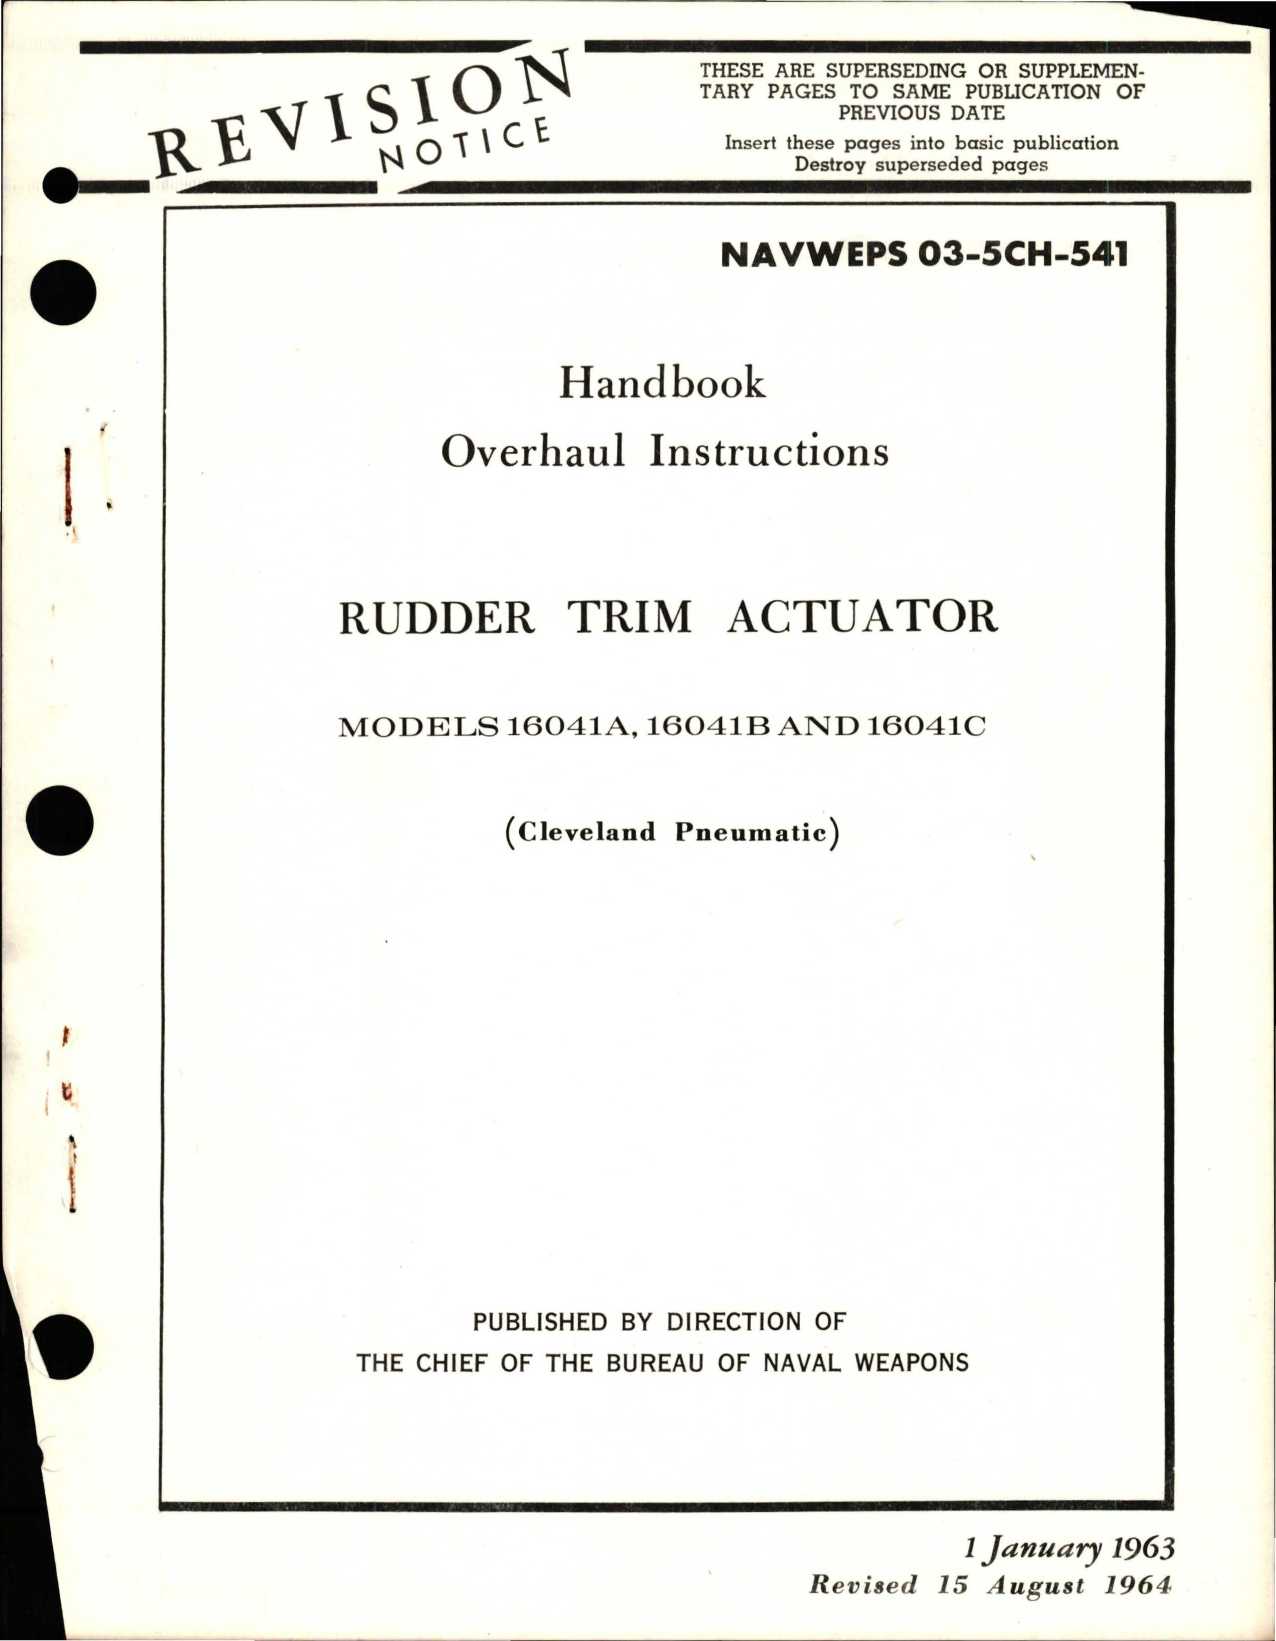 Sample page 1 from AirCorps Library document: Overhaul Instructions for Rudder Trim Actuator - Models 16041A, 16041B, and 16041C